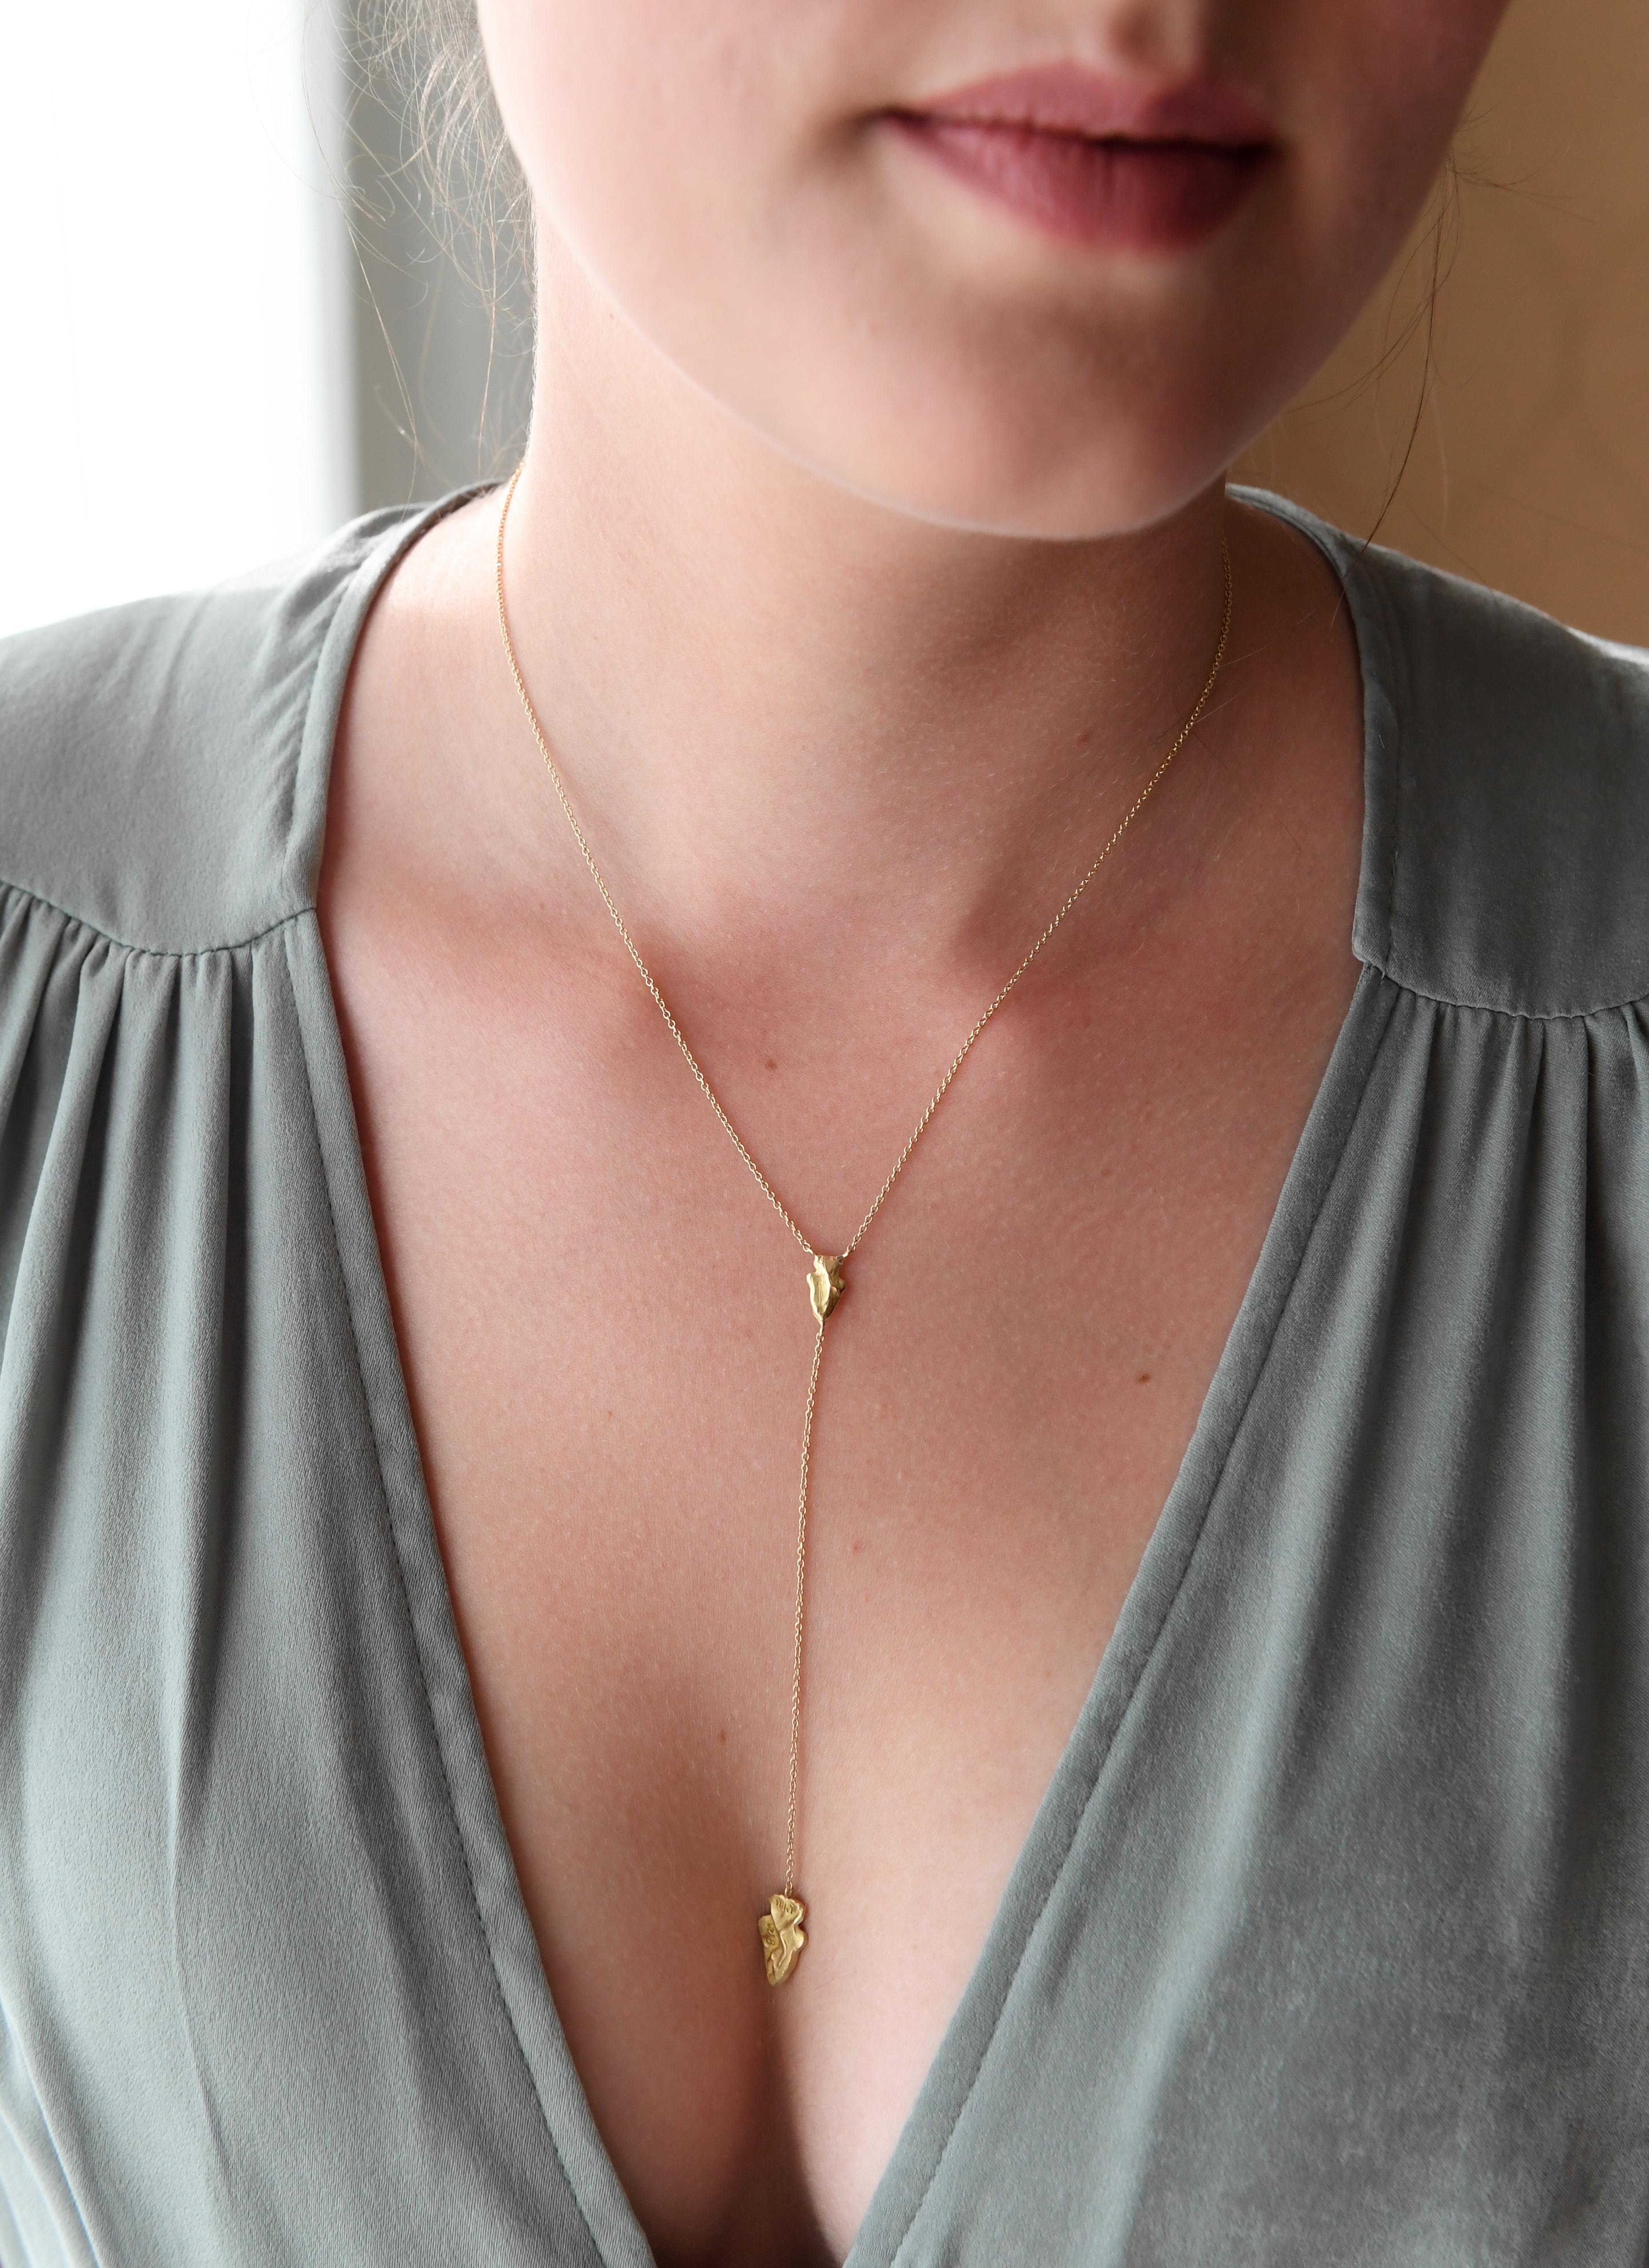 18K yellow gold, satin finish.
Smaller arrowhead is 10 millimeters long; 5 millimeters wide.
Larger arrowhead is 15 millimeters long; 9 millimeters wide.
Chain around neck is approximately 15 3/4